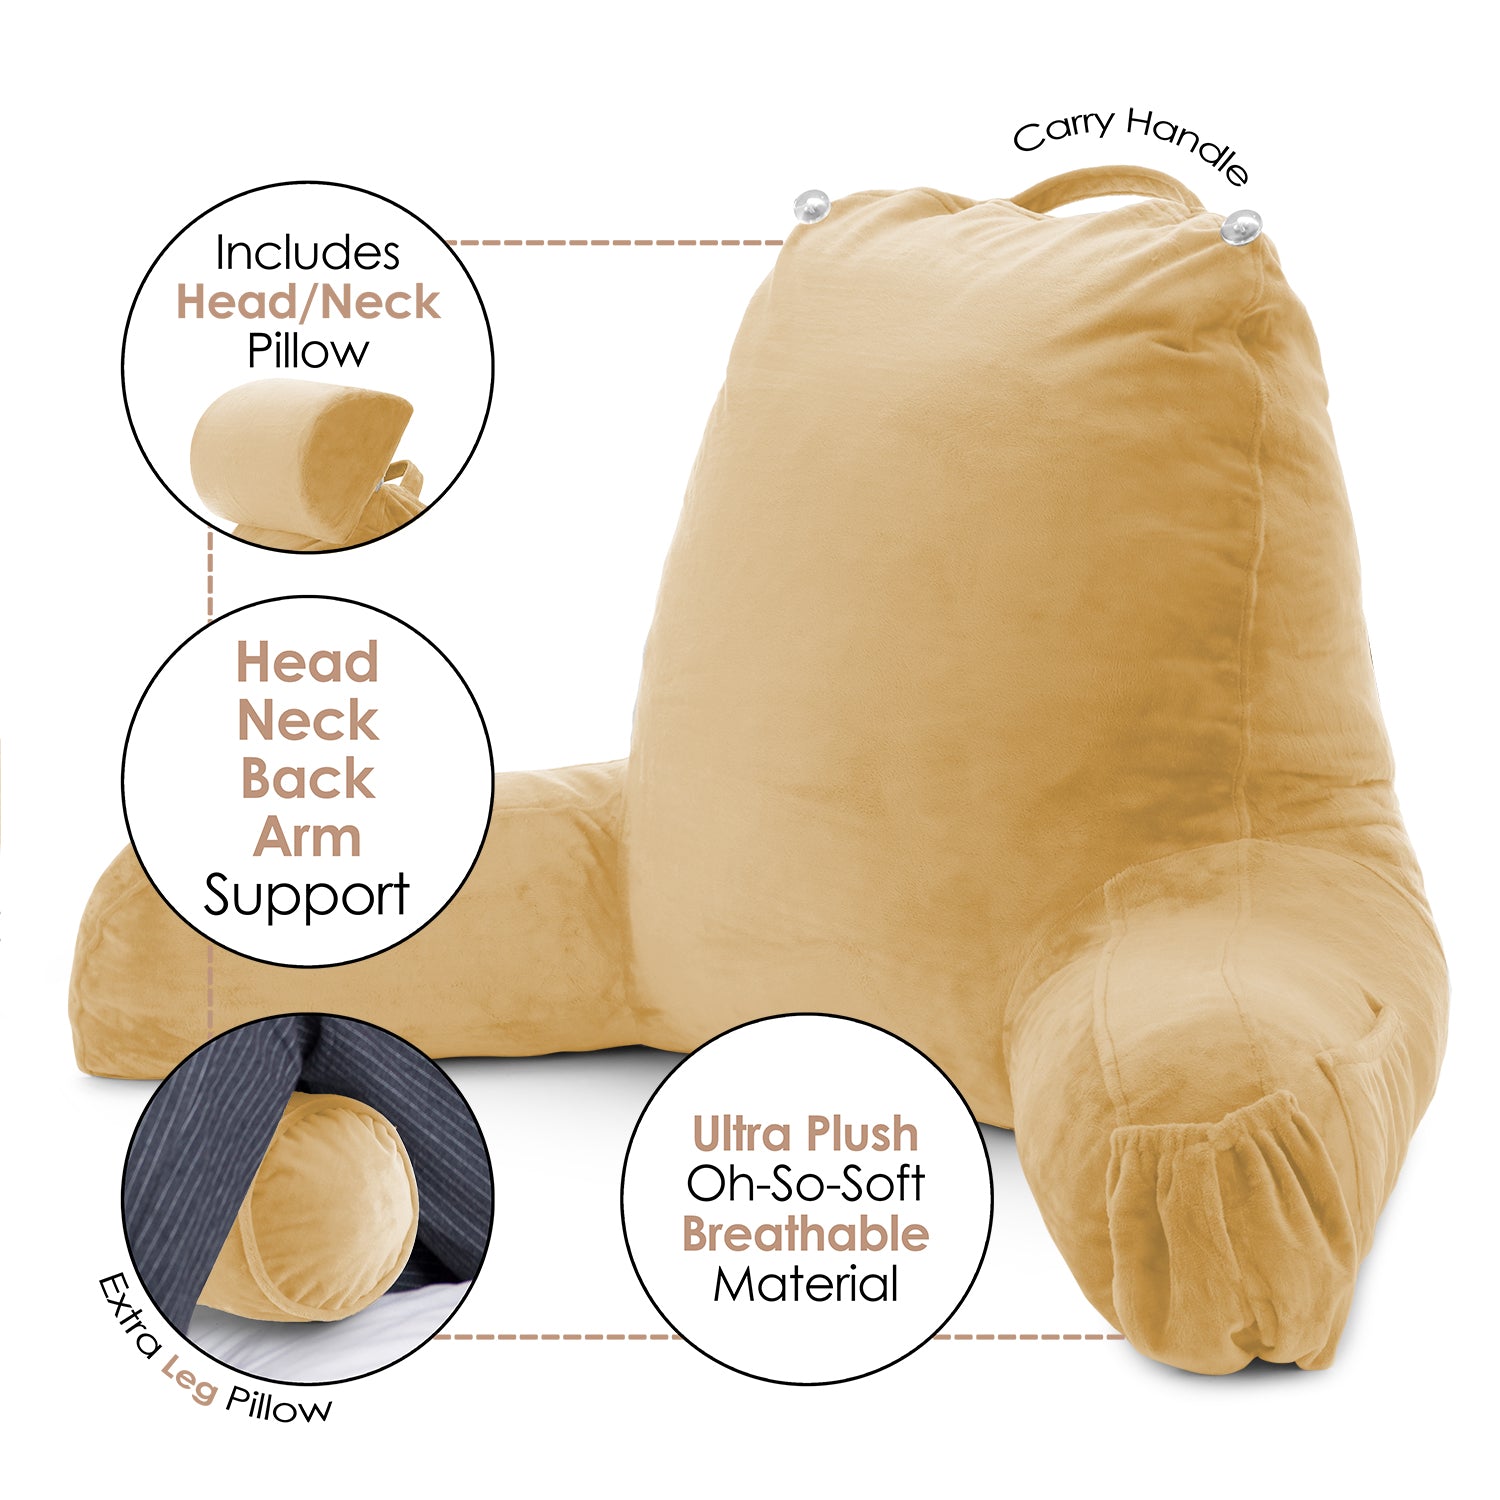 Nestl Reading Pillow, Extra Large Bed Rest Pillow with Arms – Premium Shredded Memory Foam TV Pillow, Detachable Neck Roll & Lumbar Support Pillow - Camel Gold